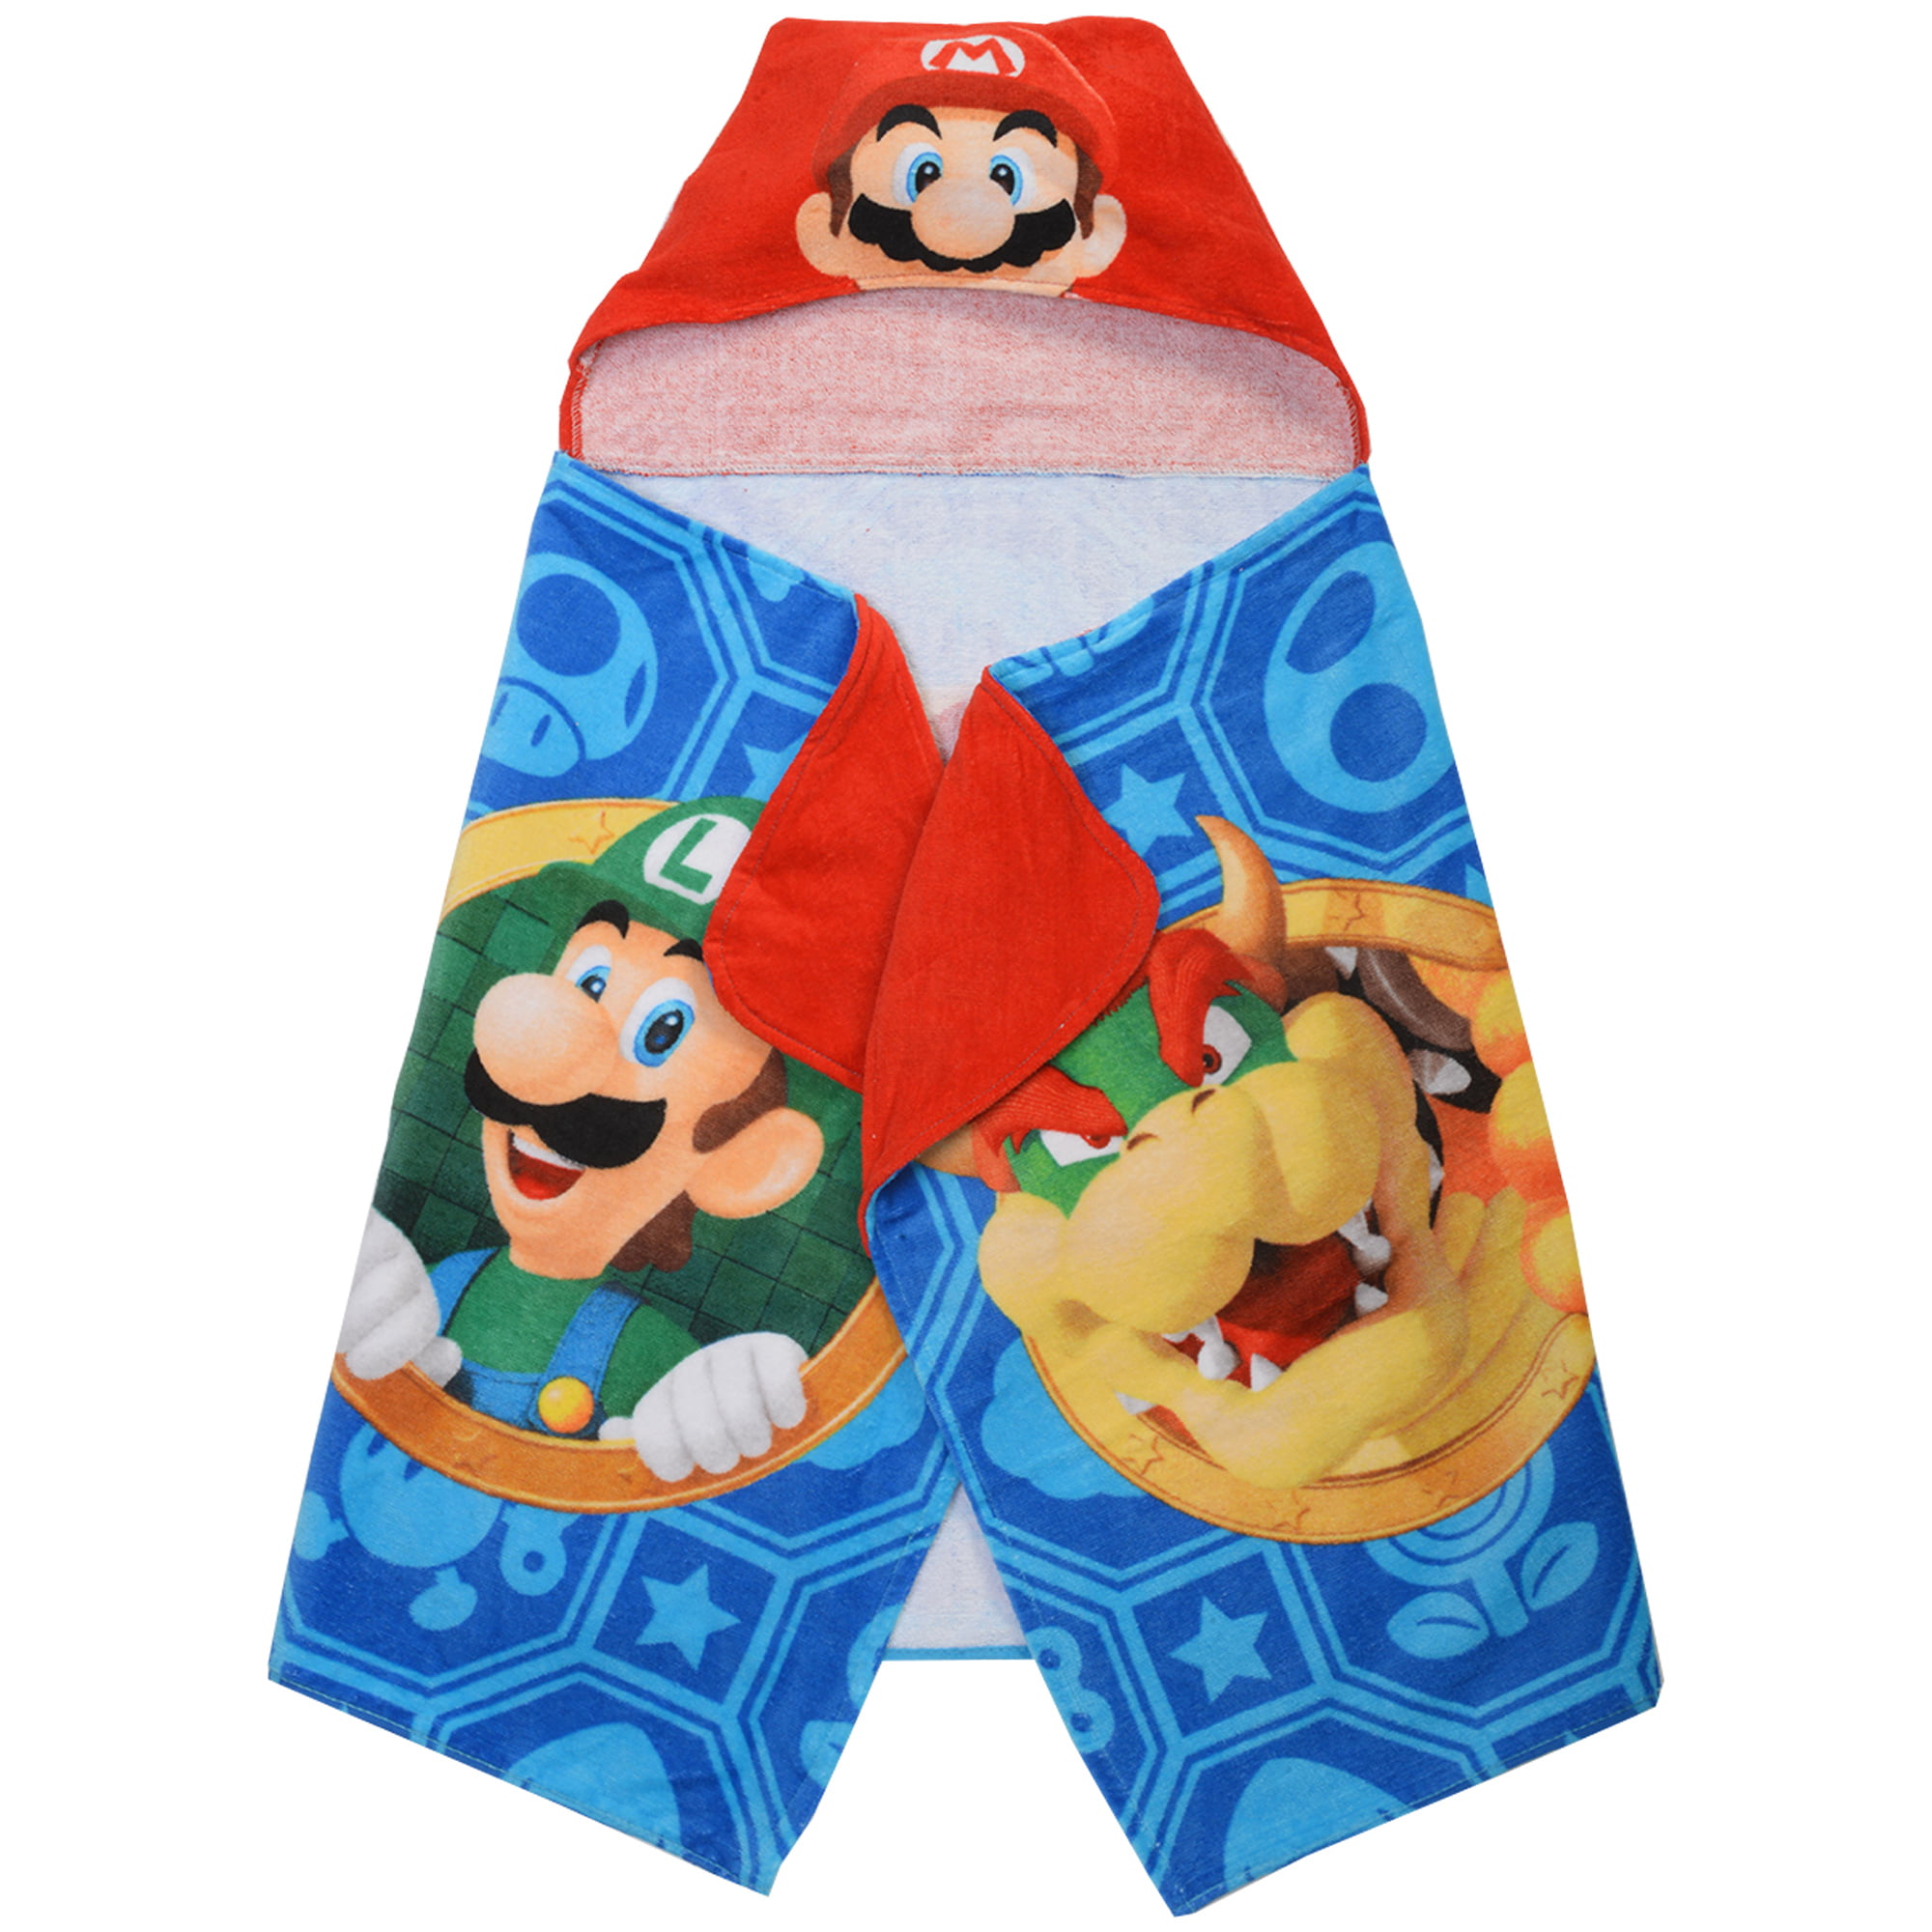 Beach or Swimming Pool Red Plumber Brother Mario Hooded Towel Kid/'s Hooded Towel Character Inspired Mario Towel for Bath